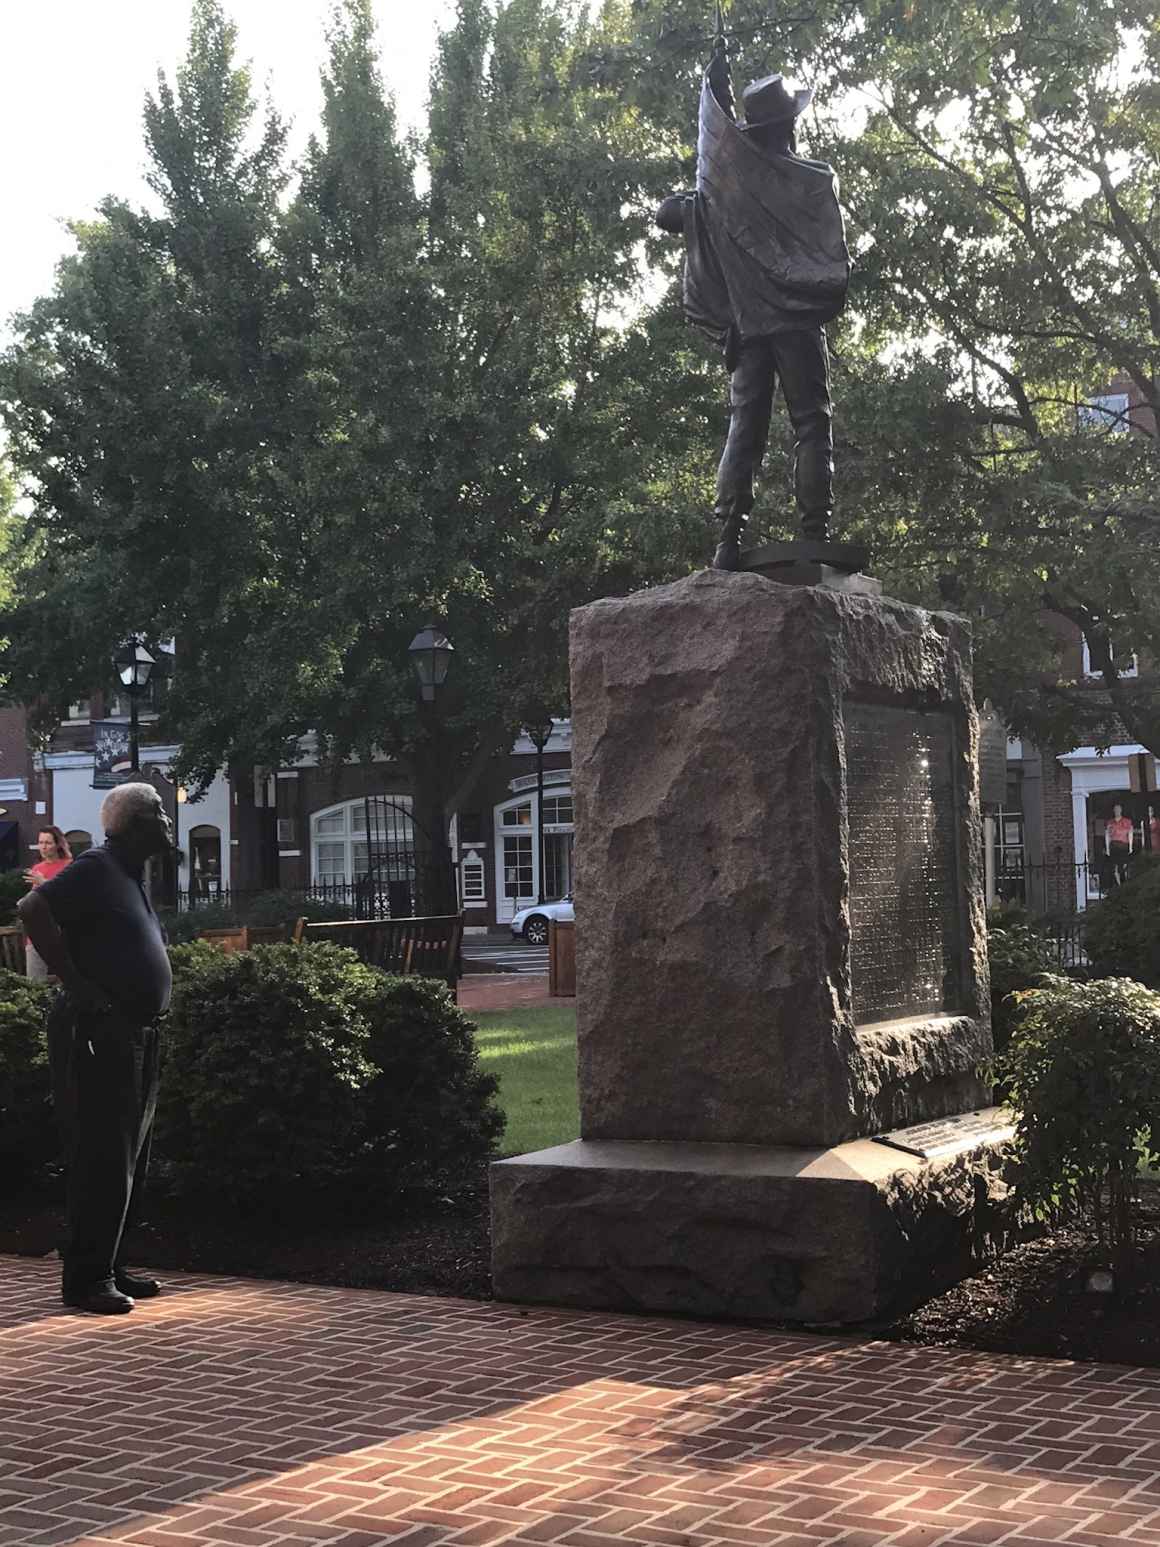 A Black man looks at the Talbot County Confederate statue in Easton, Maryland.